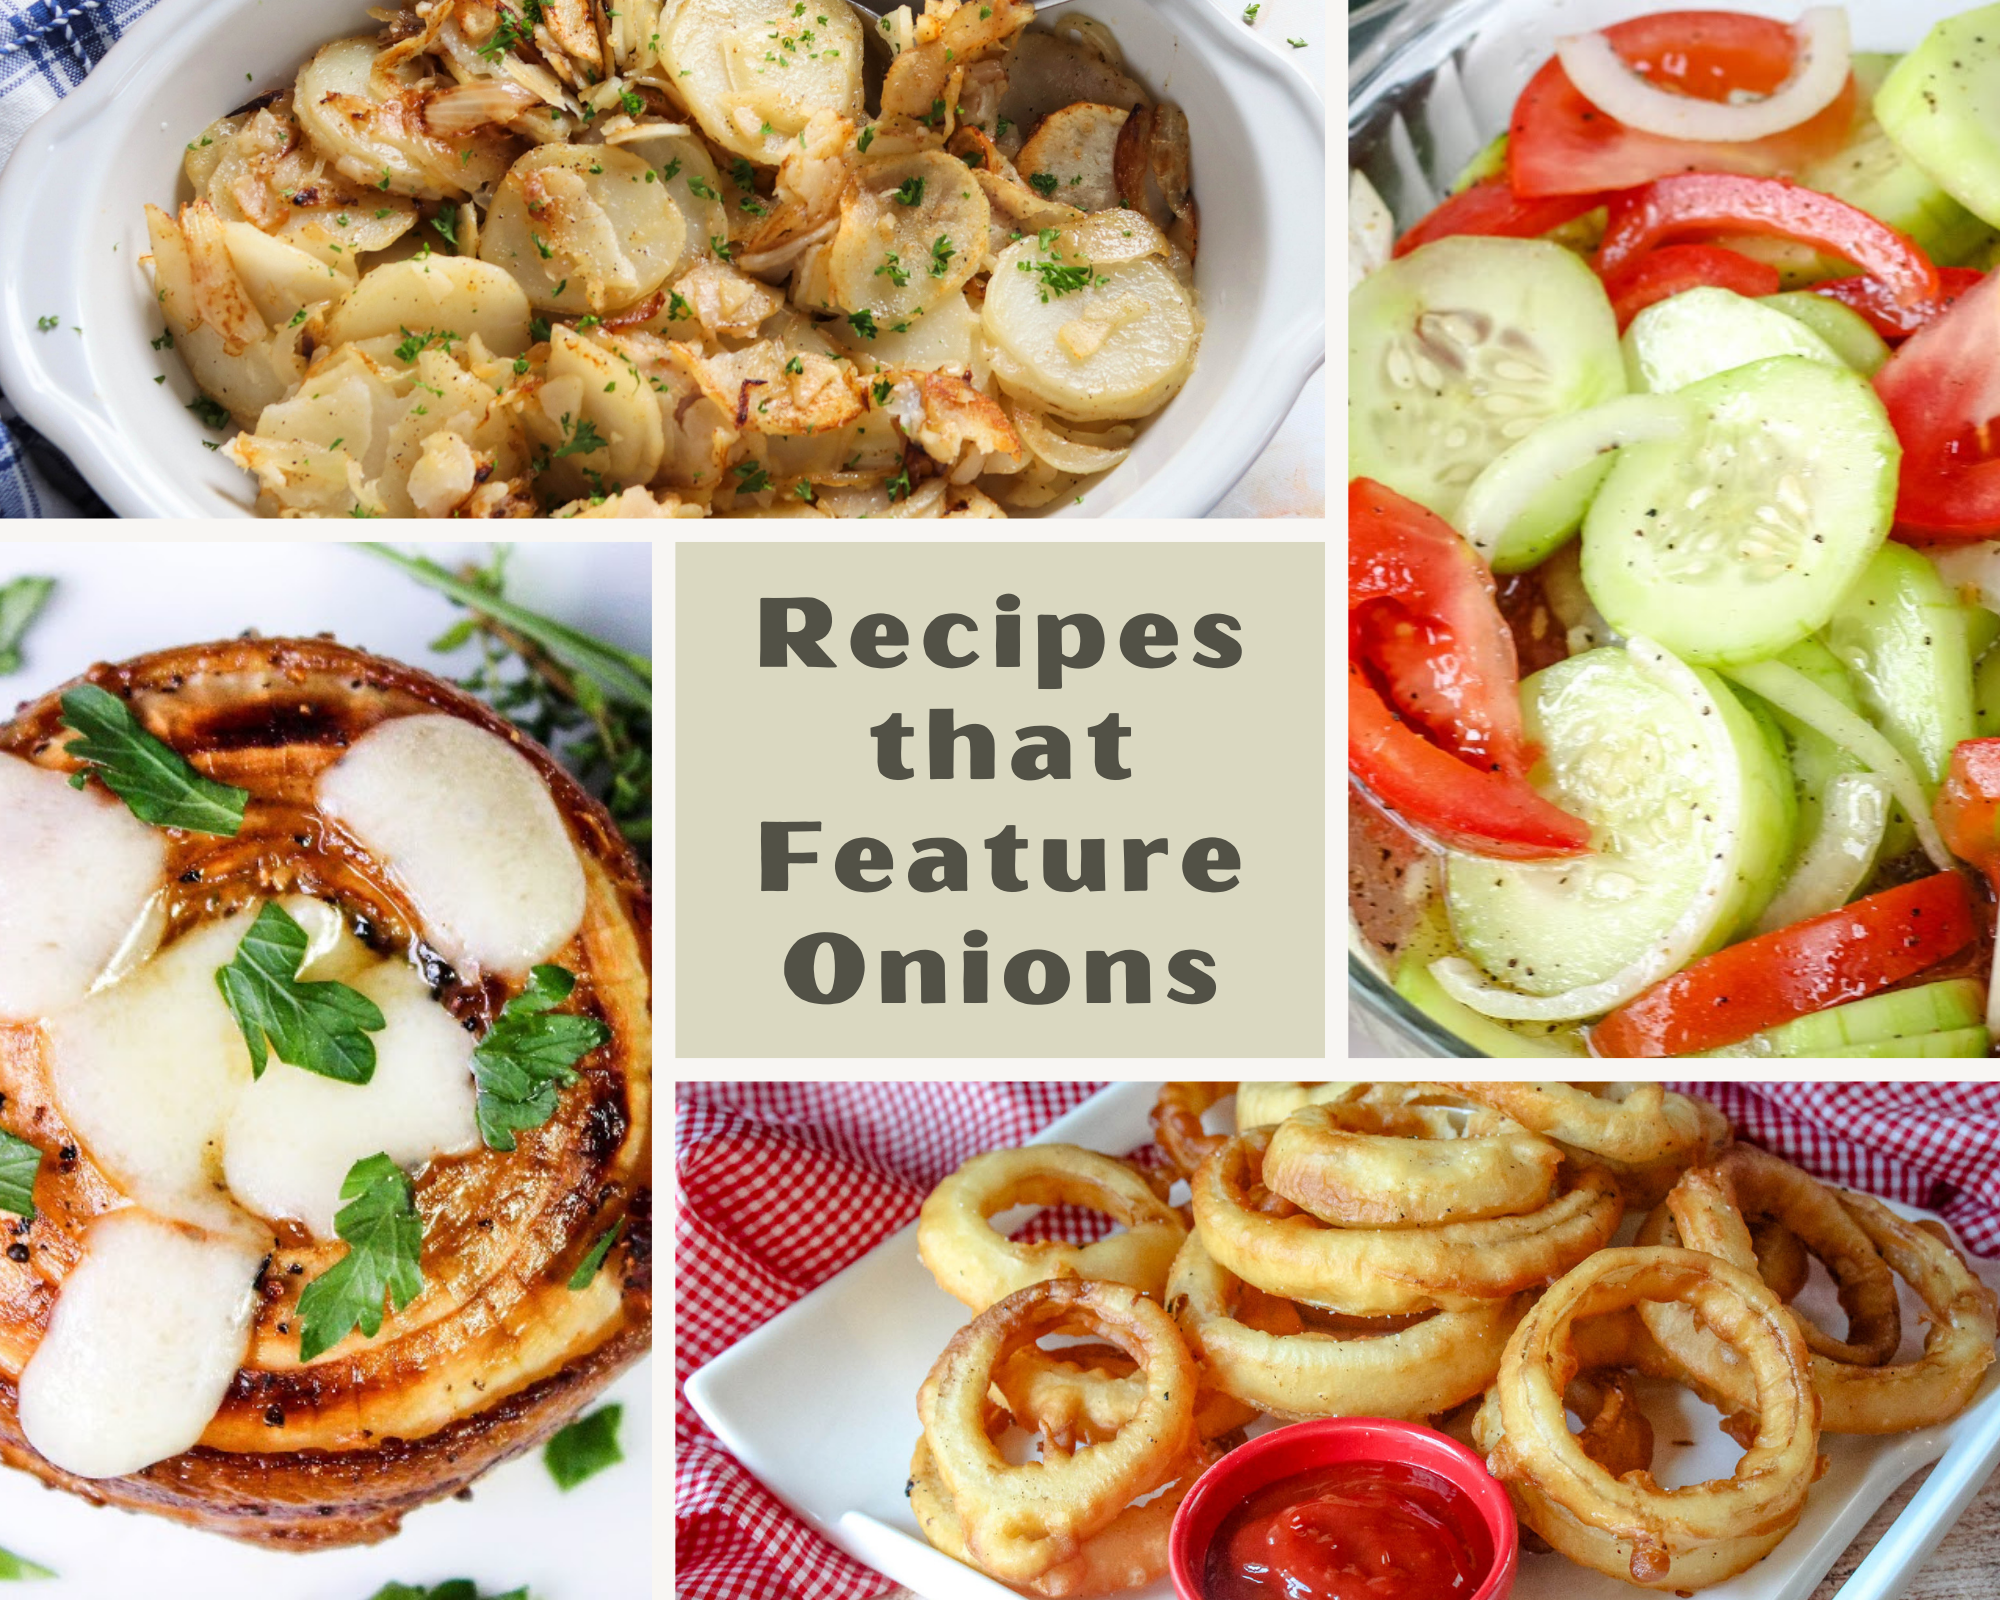 Recipes that Feature Onions